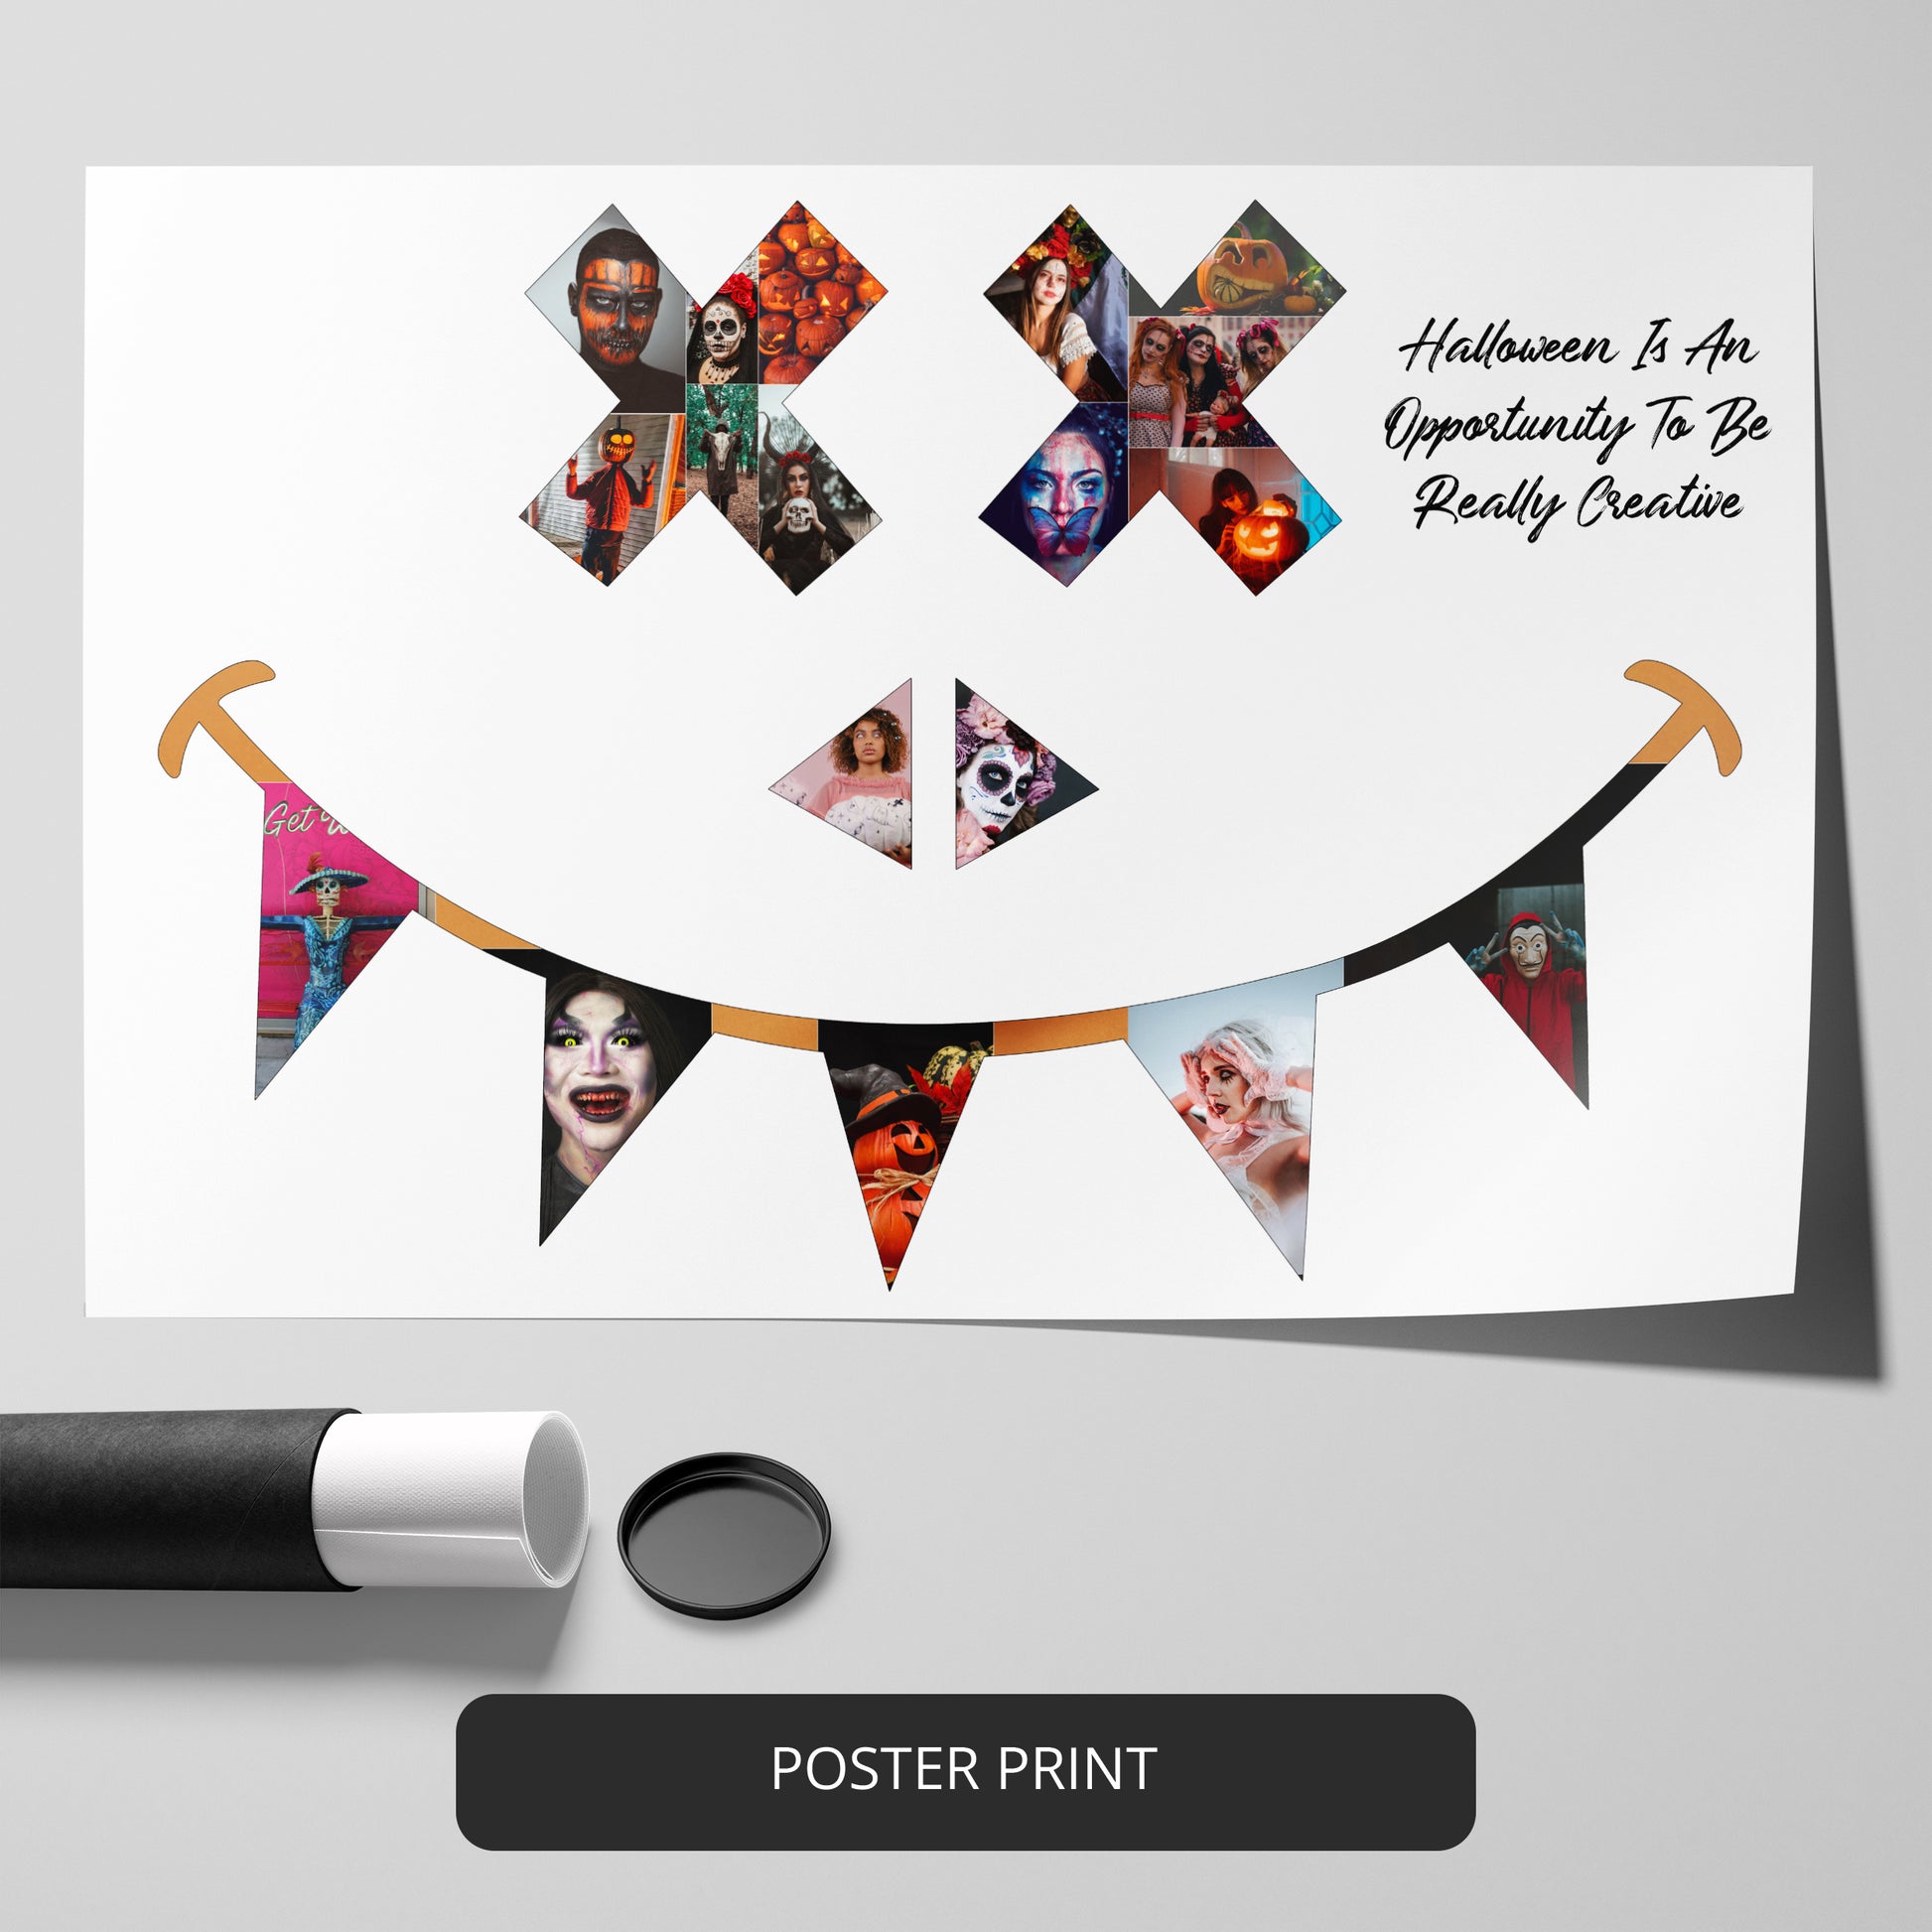 Halloween Gift Ideas: Customizable Personalized Photo Collage